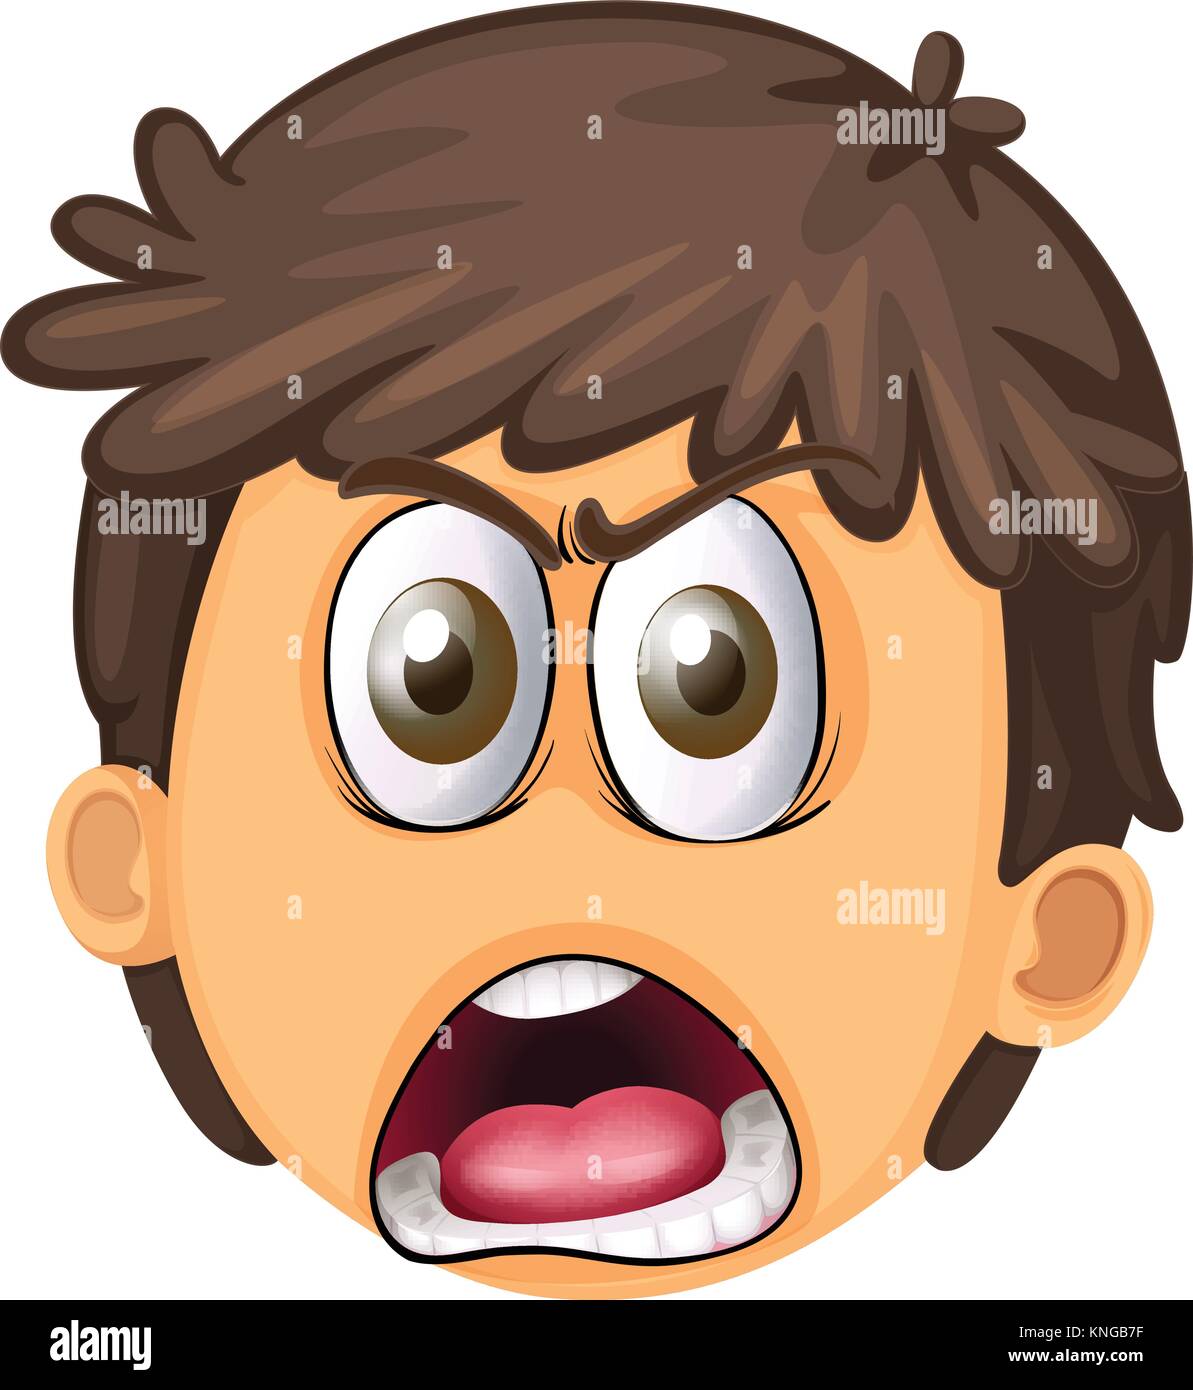 illustration of a boy face on a white background Stock Vector